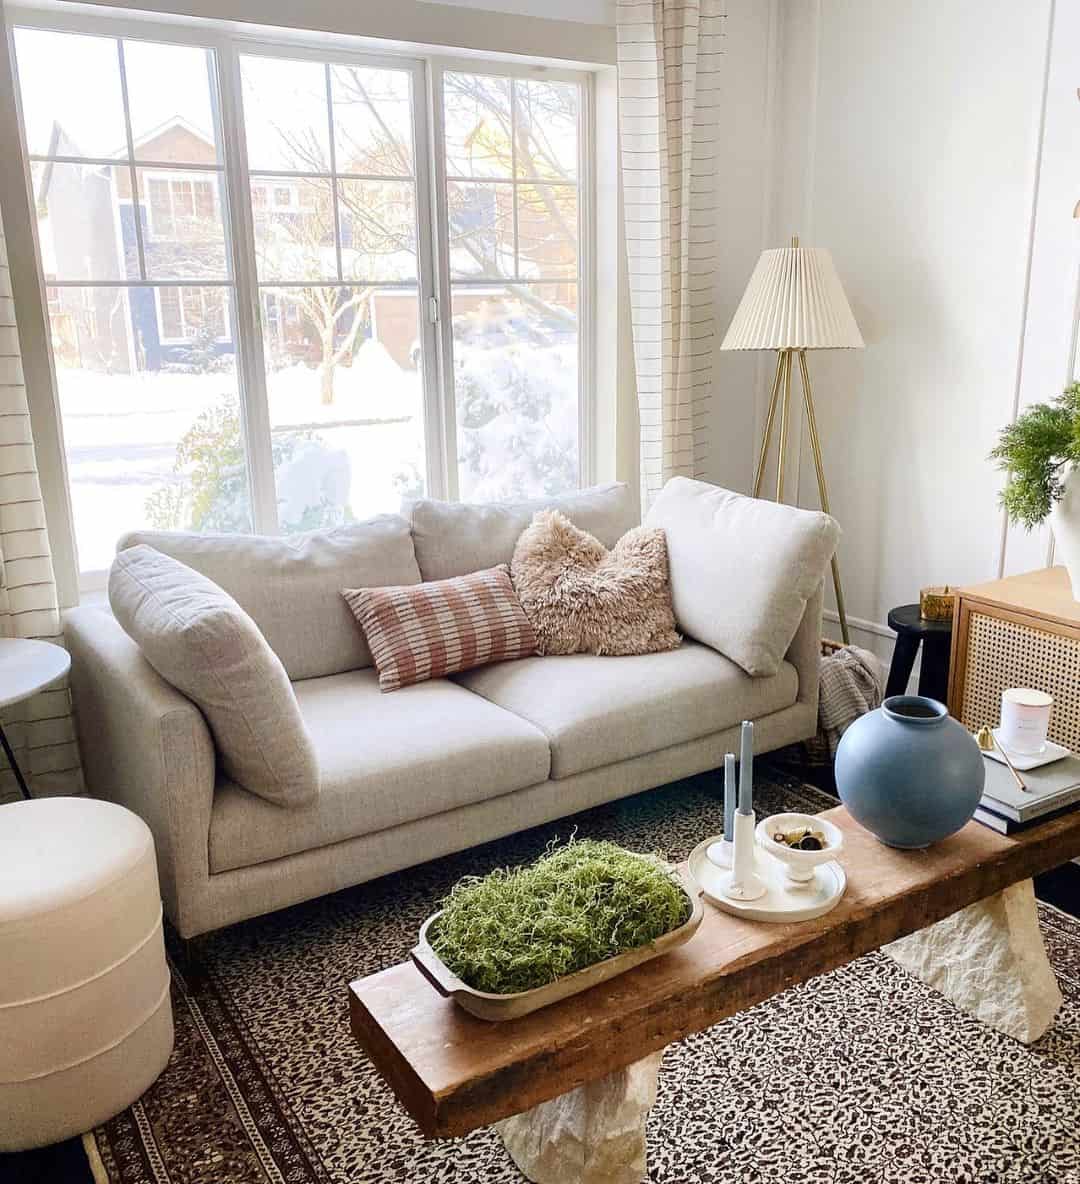 White Curtains and a Unique Coffee Table - Soul & Lane